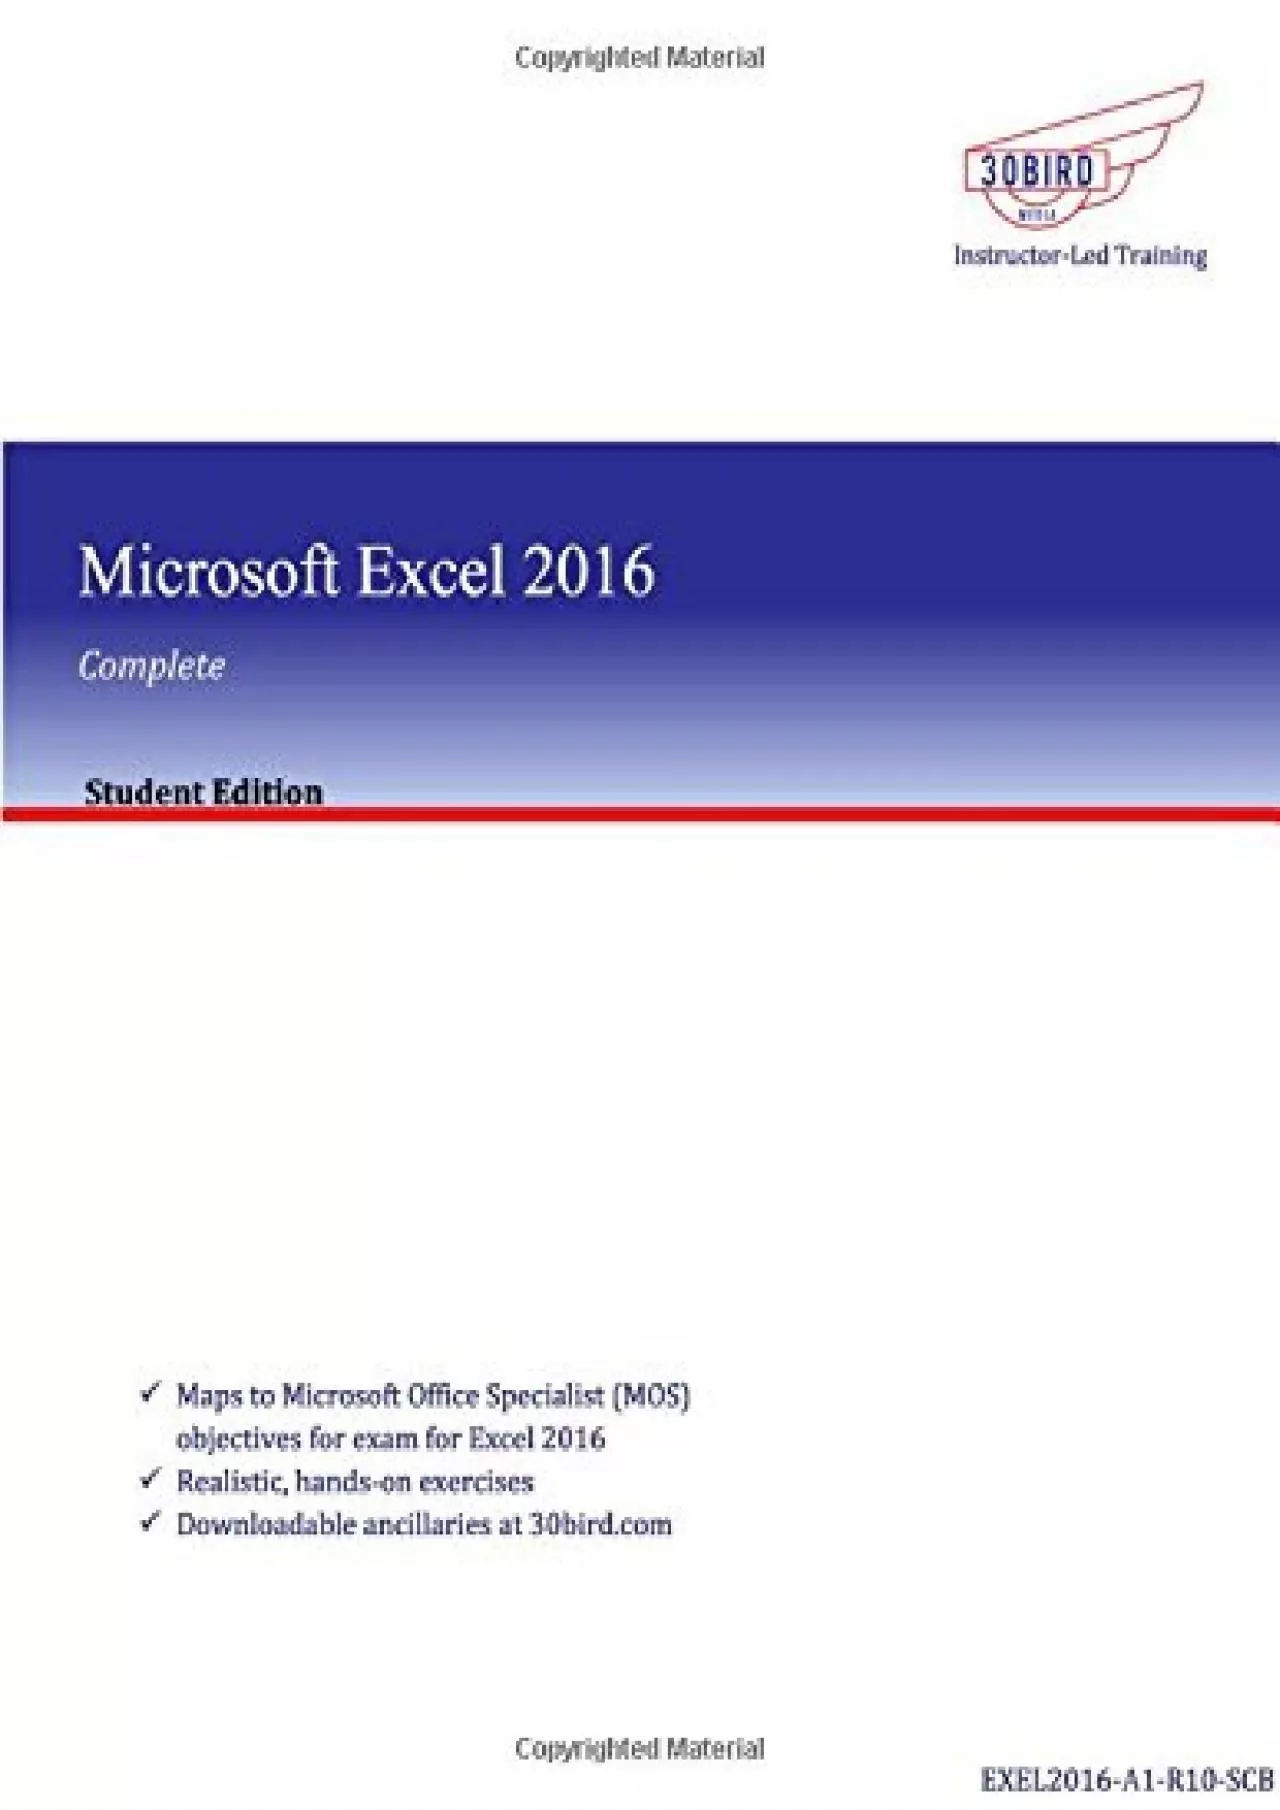 (BOOK)-Excel 2016 Complete - Microsoft Office Excel Training Book Student Edition - Color